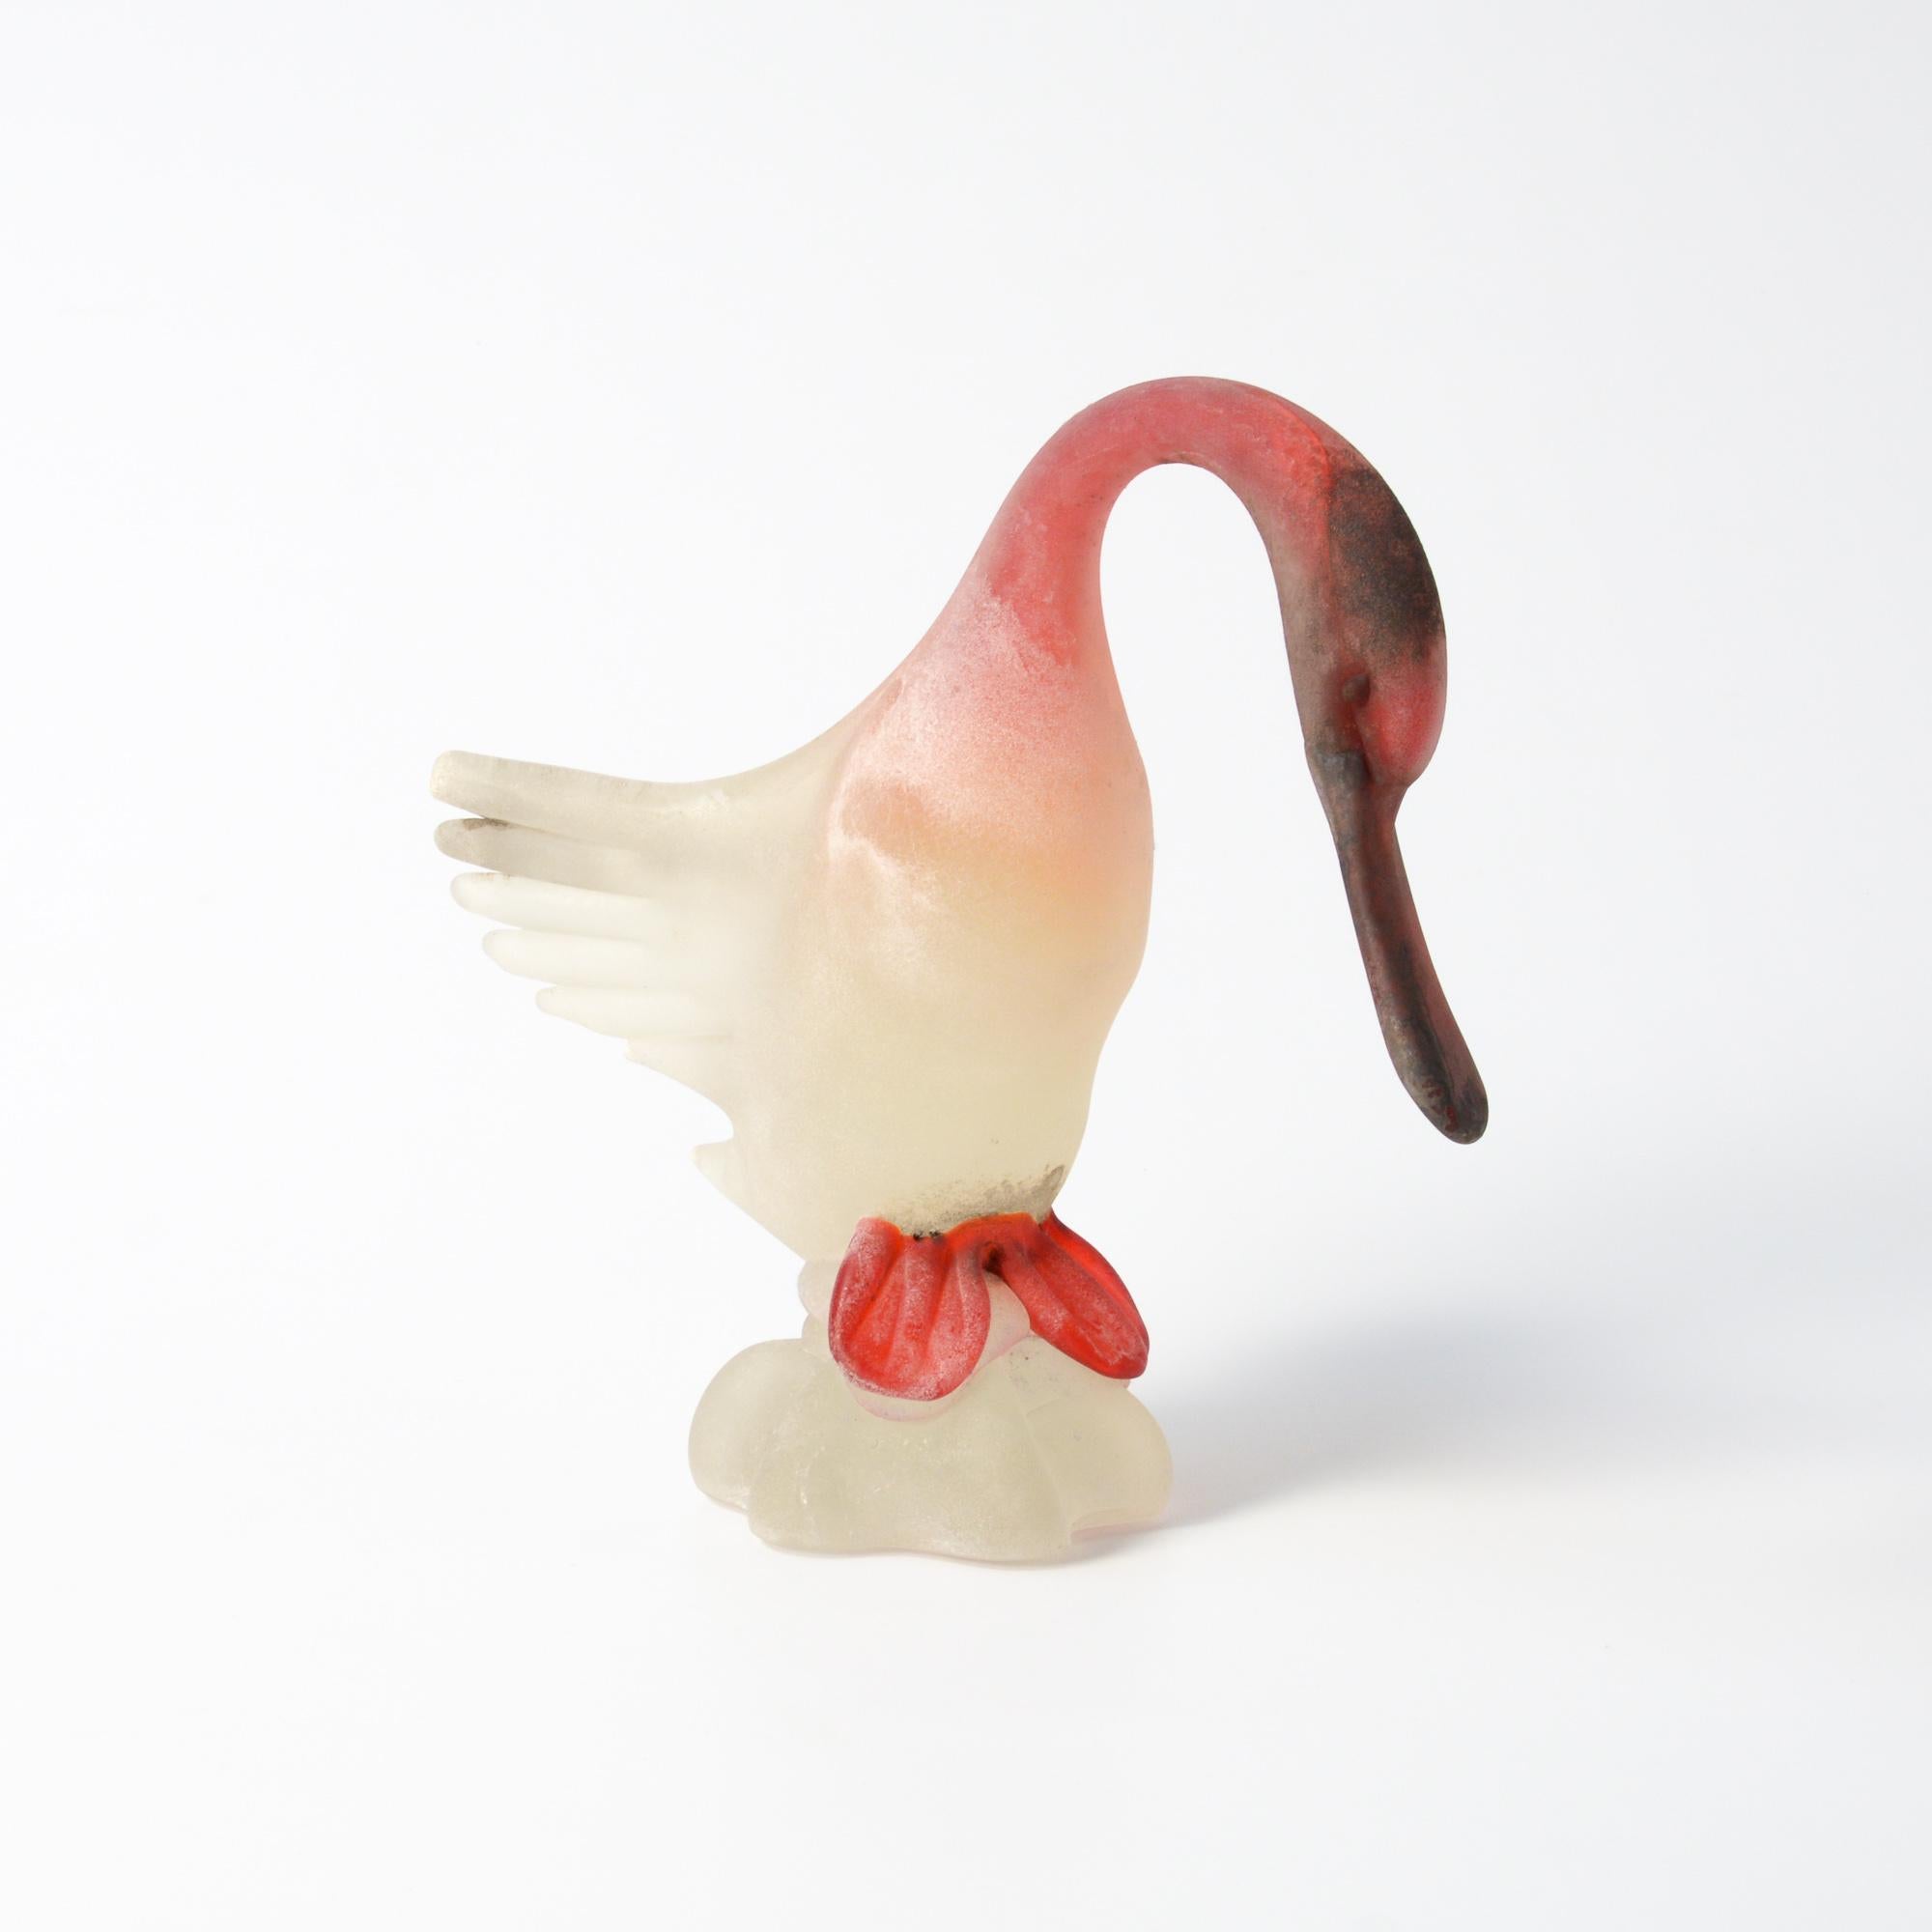 This Murano glass duck with spread wings in red scavo finish was completely handmade. This duck was made in the late 1950s probably by the historical glass-factory Gino Cenedese e Figlio, famous for the use of the “scavo” technique, which was first